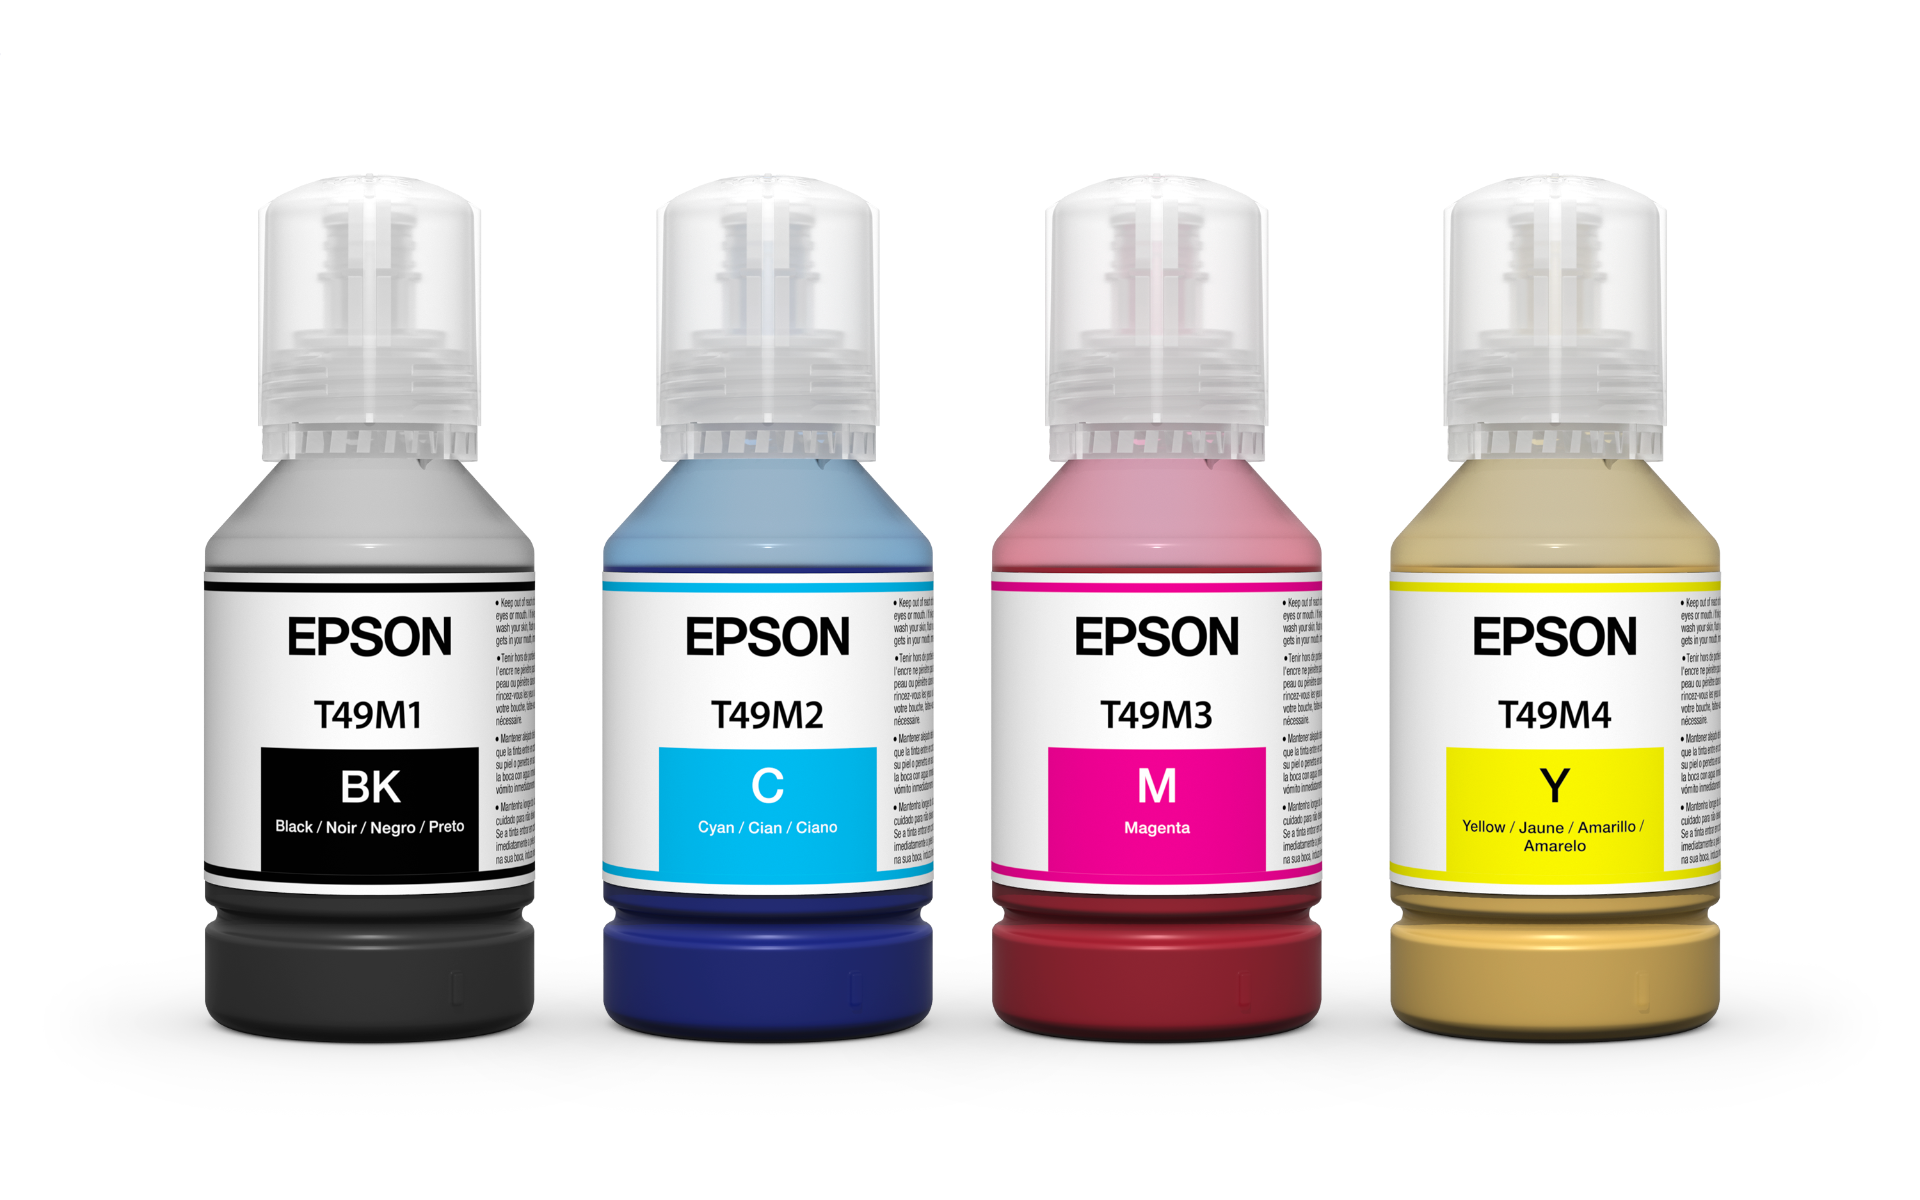 Epson® SureColor F170/ F570 Inks-Individual Bottles -140mL - Joto Imaging Supplies Canada